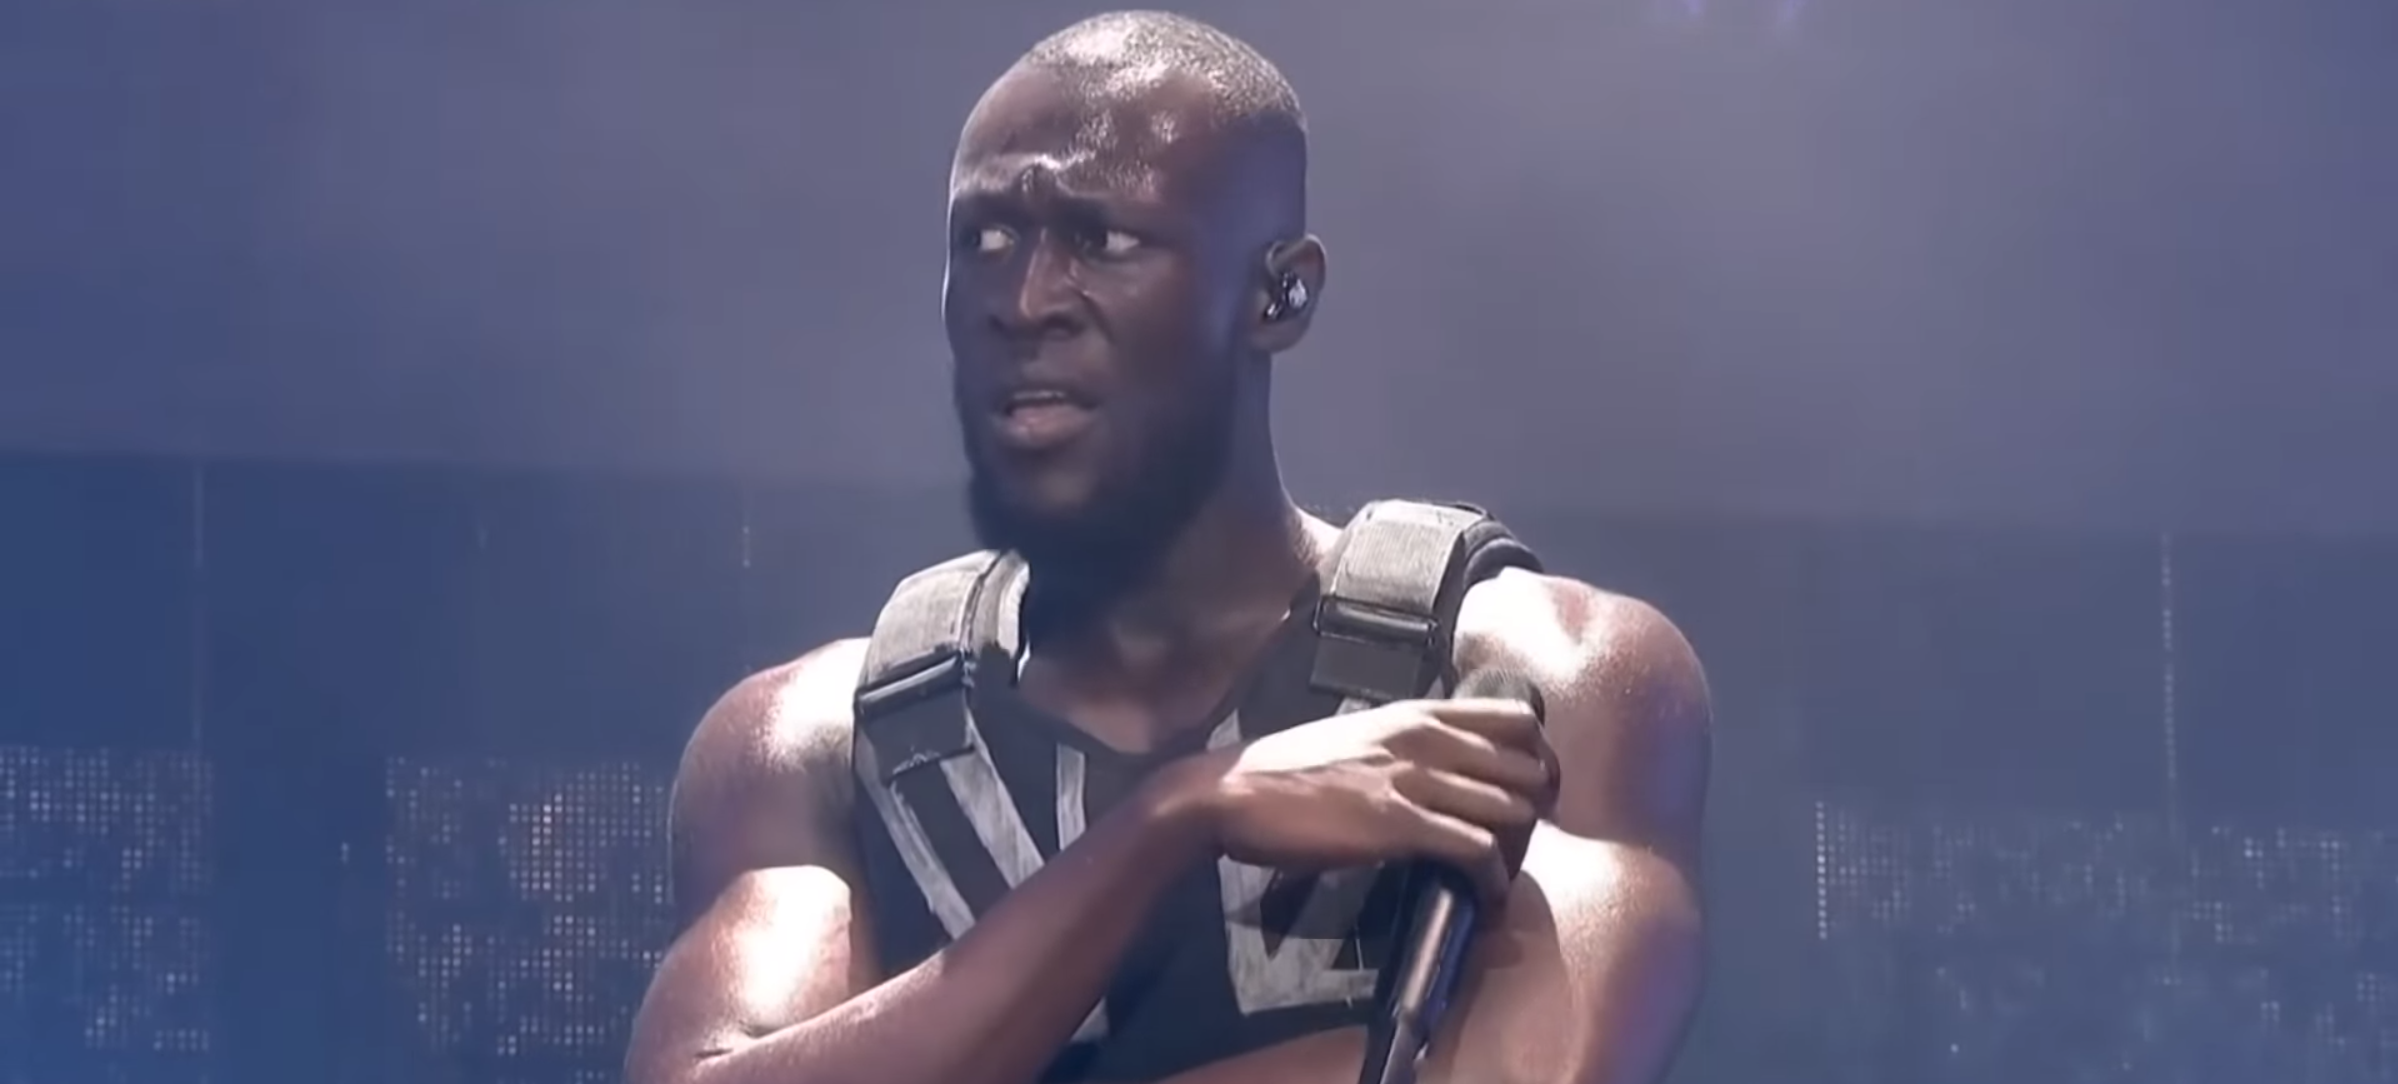 This week Stormzy faces backlash for saying racism exists, while the Windrush scandal continues